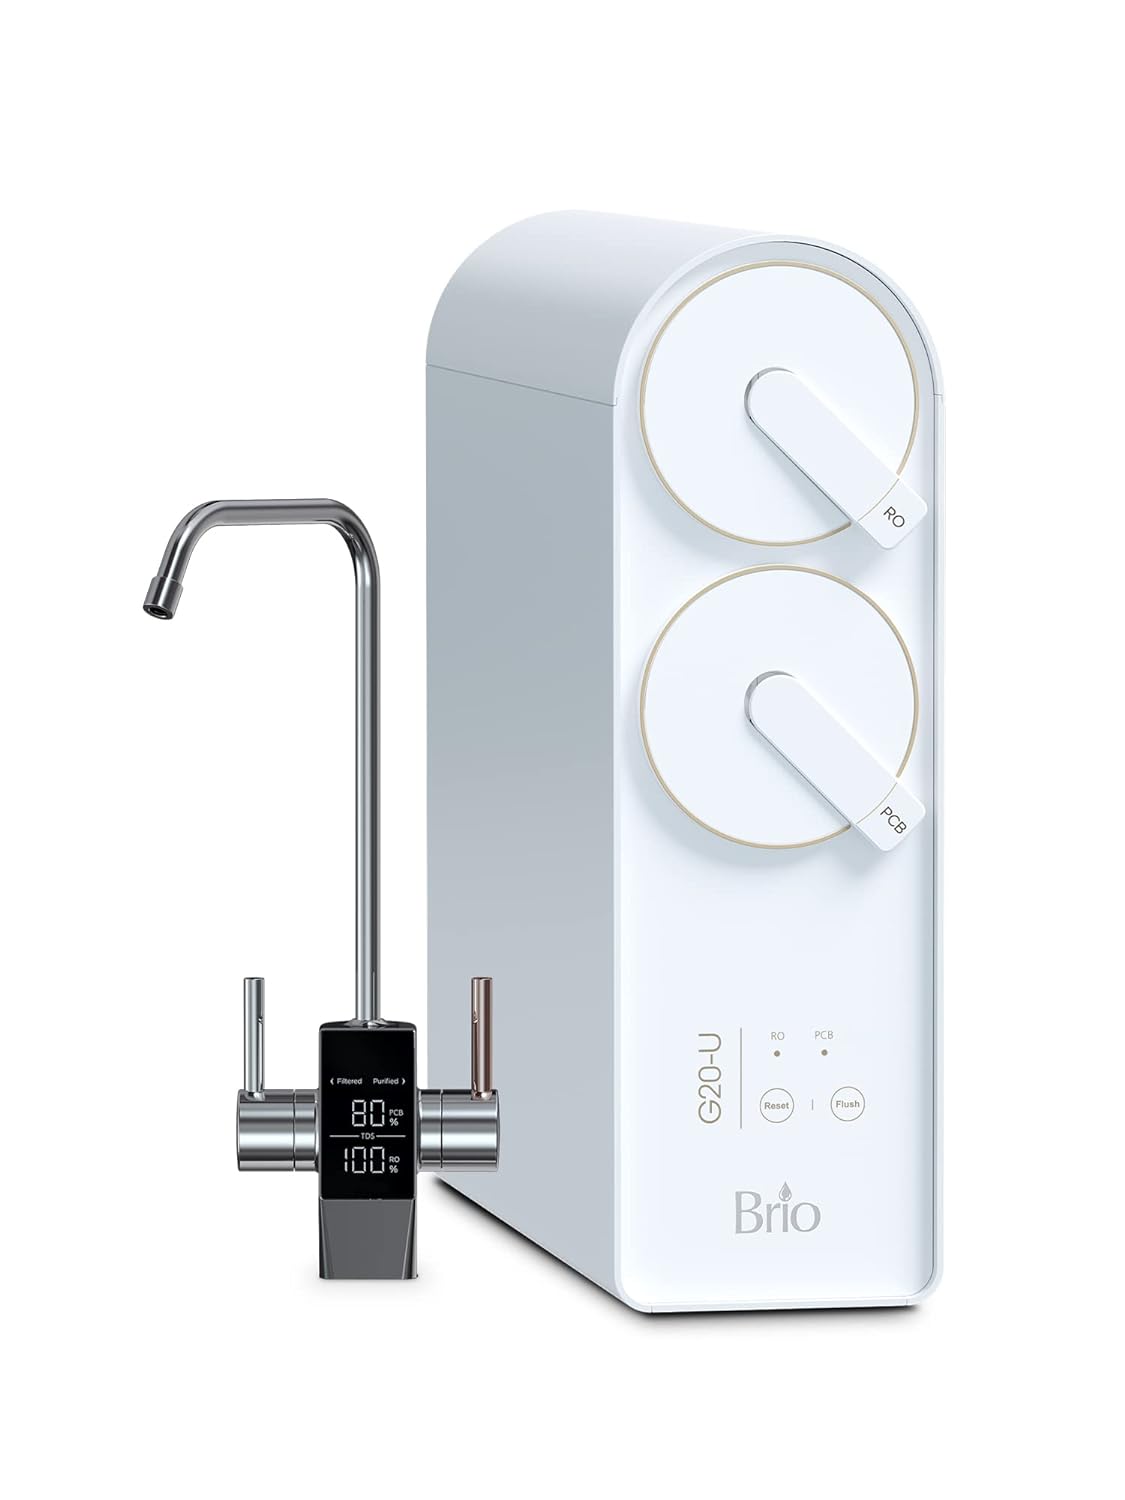 Brio G20-U Reverse Osmosis Water Filtration System w/ Smart Display Faucet: White $116.29, Brown $136.02 or Less + Free Shipping